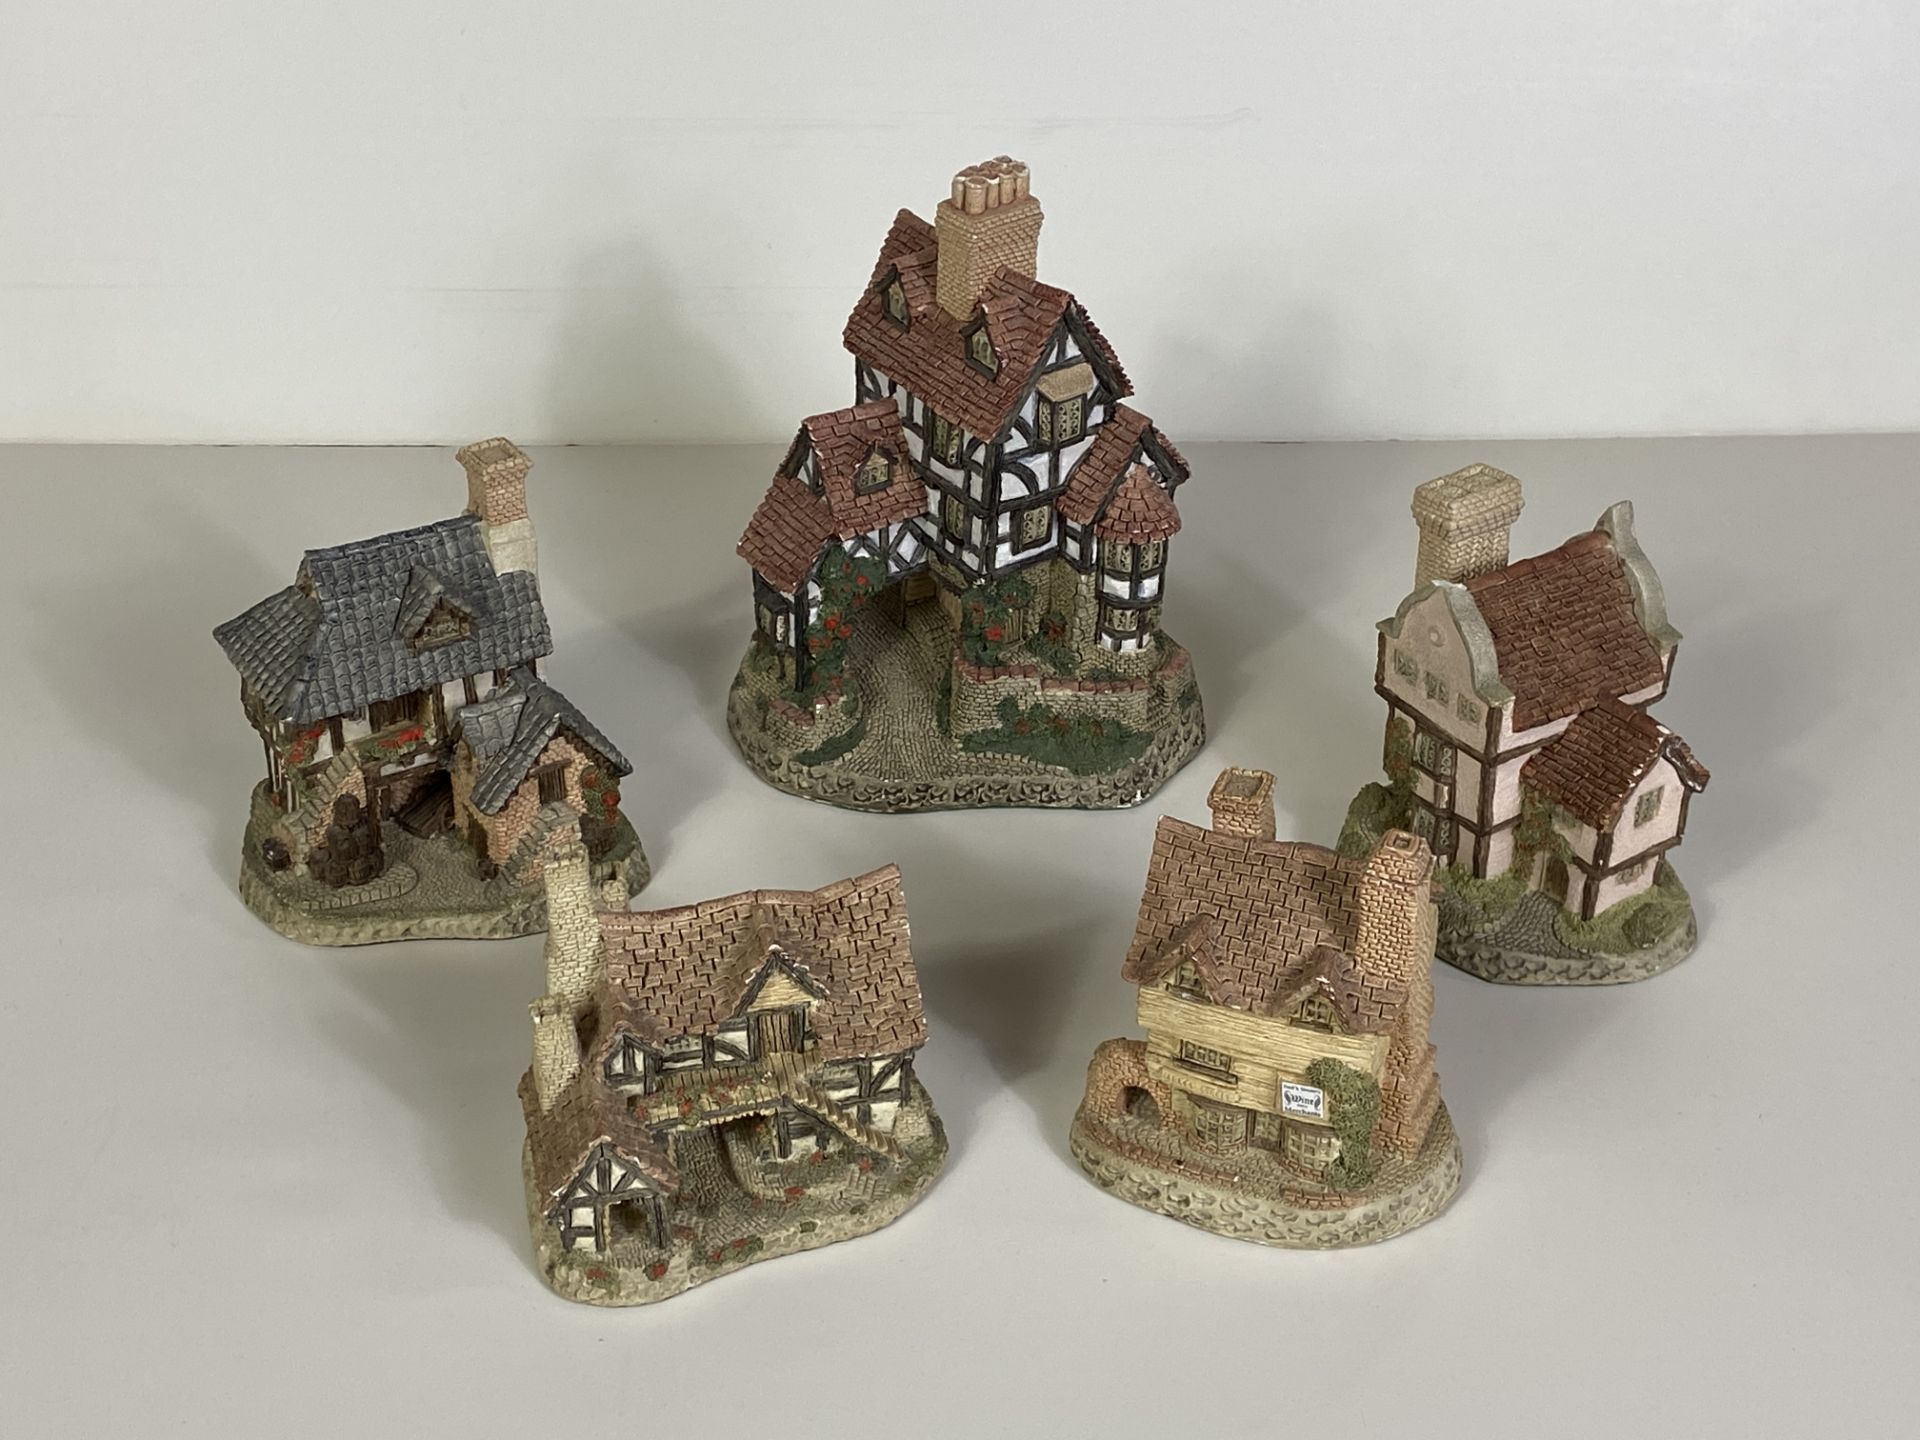 5 David Winter English Countryside Houses/Building Sculptures